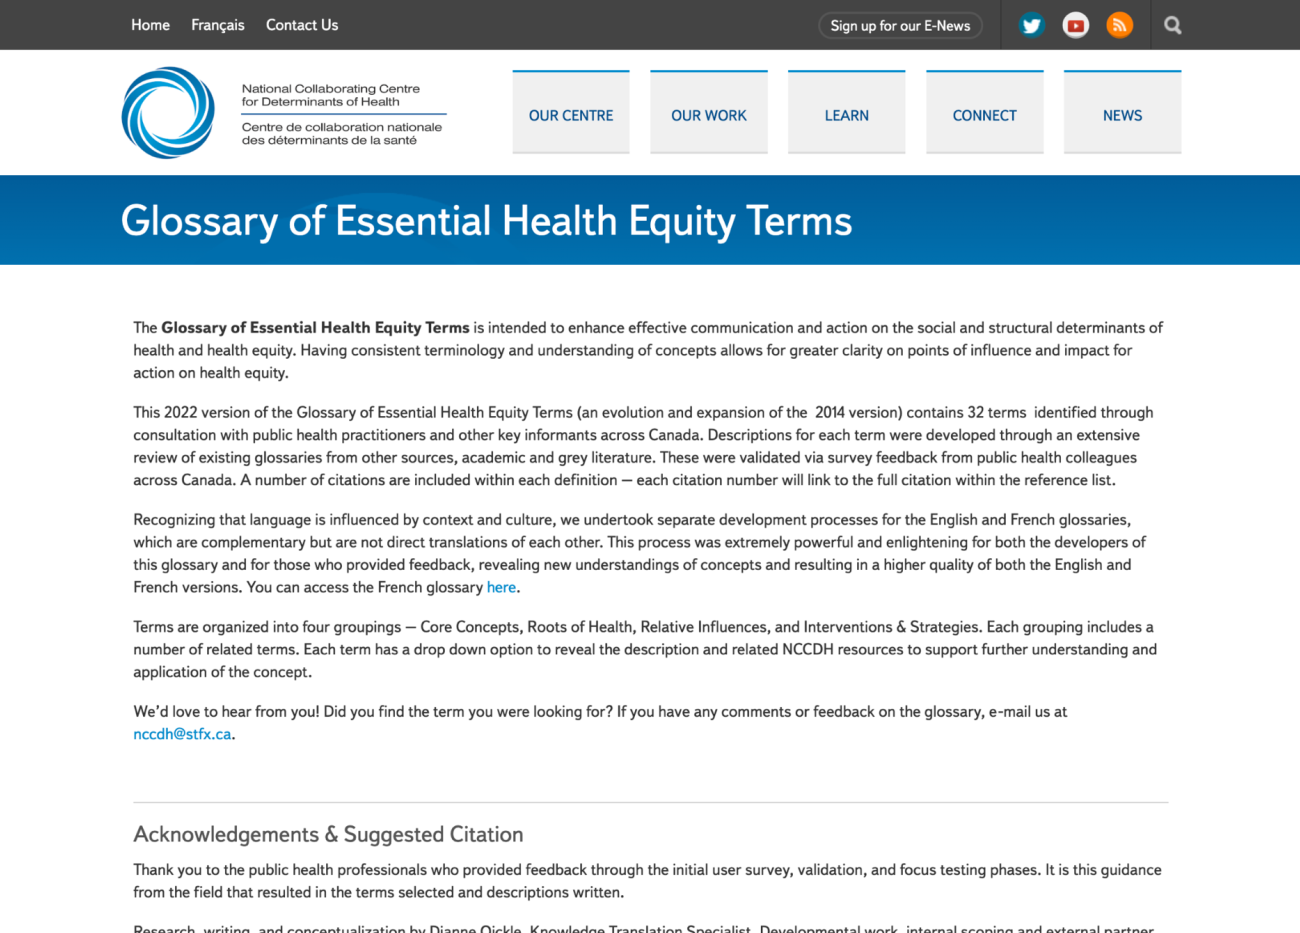 Screenshot of the NCCDH Glossary of Essential Health Equity Terms